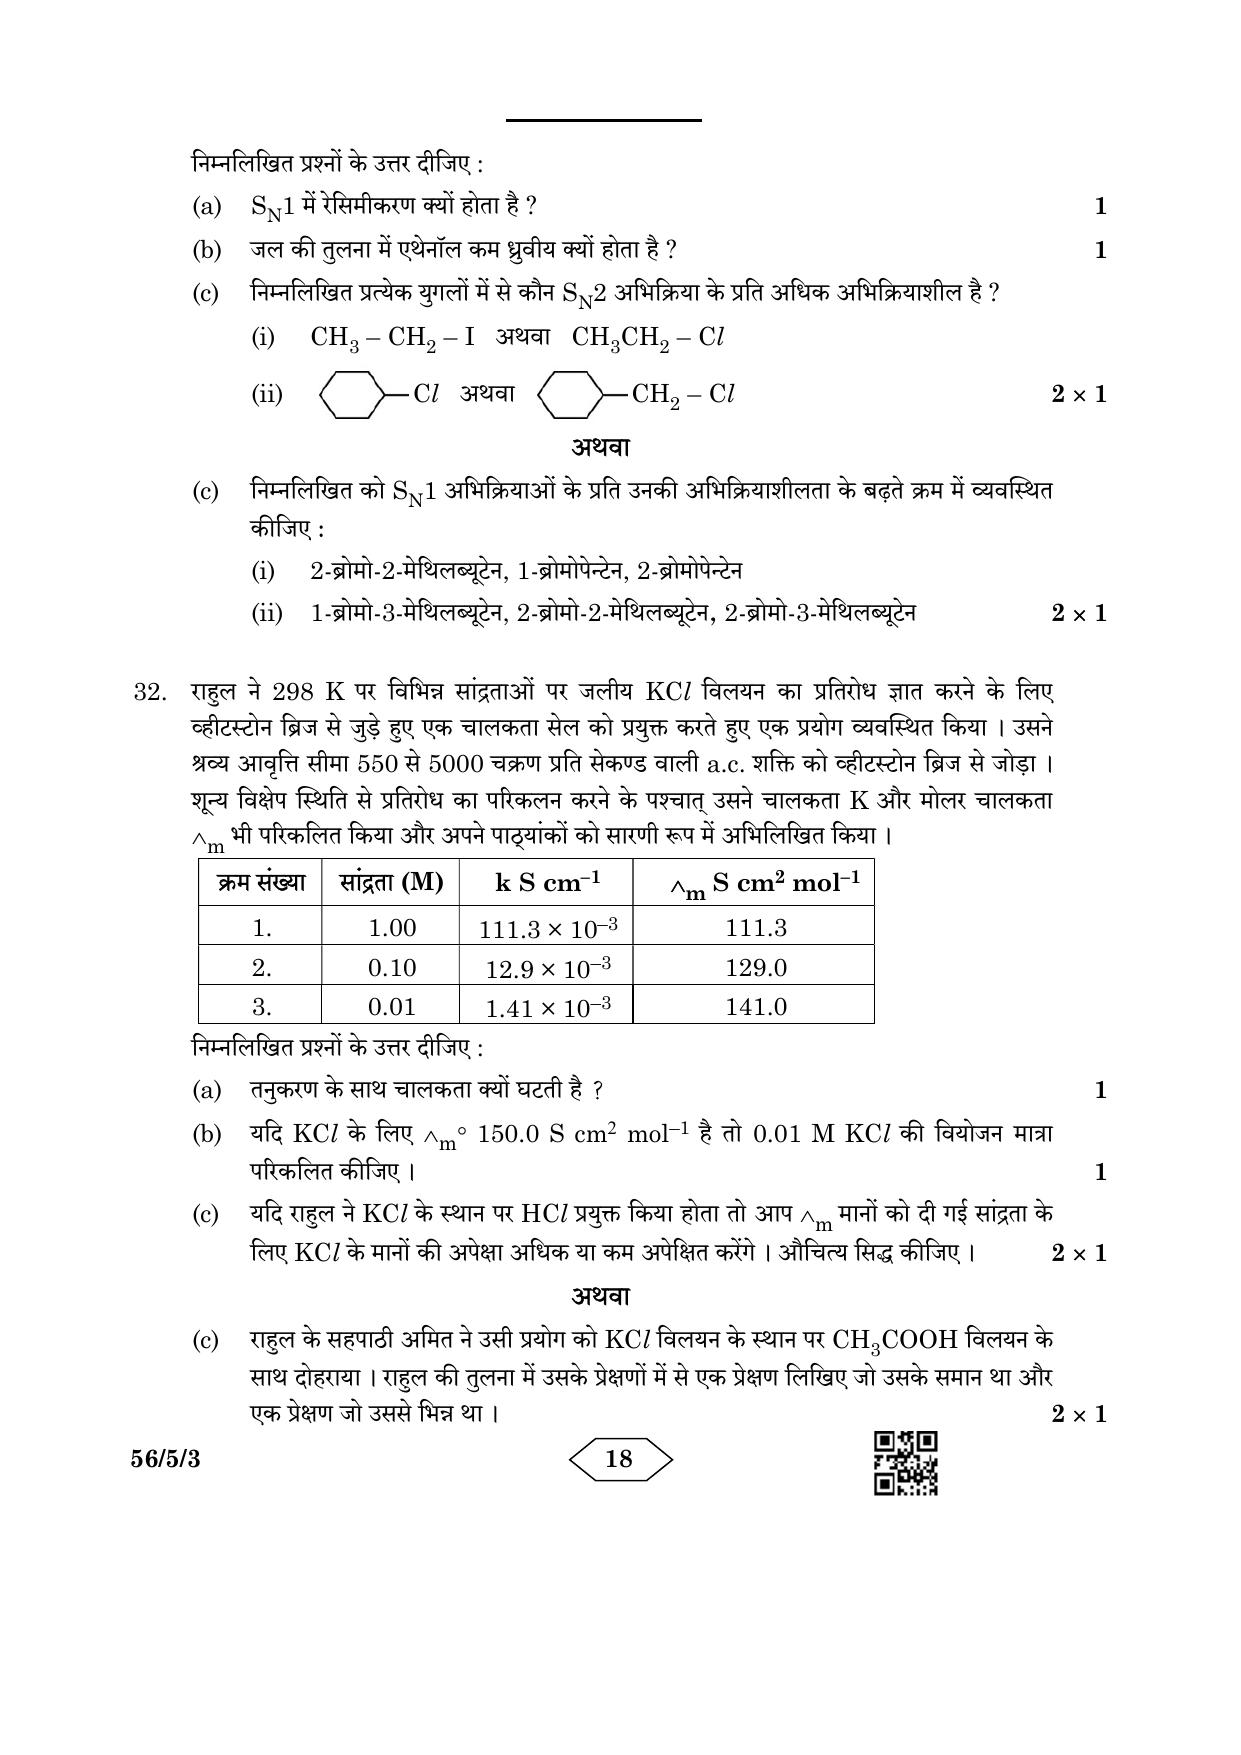 CBSE Class 12 56-5-3 Chemistry 2023 Question Paper - Page 18